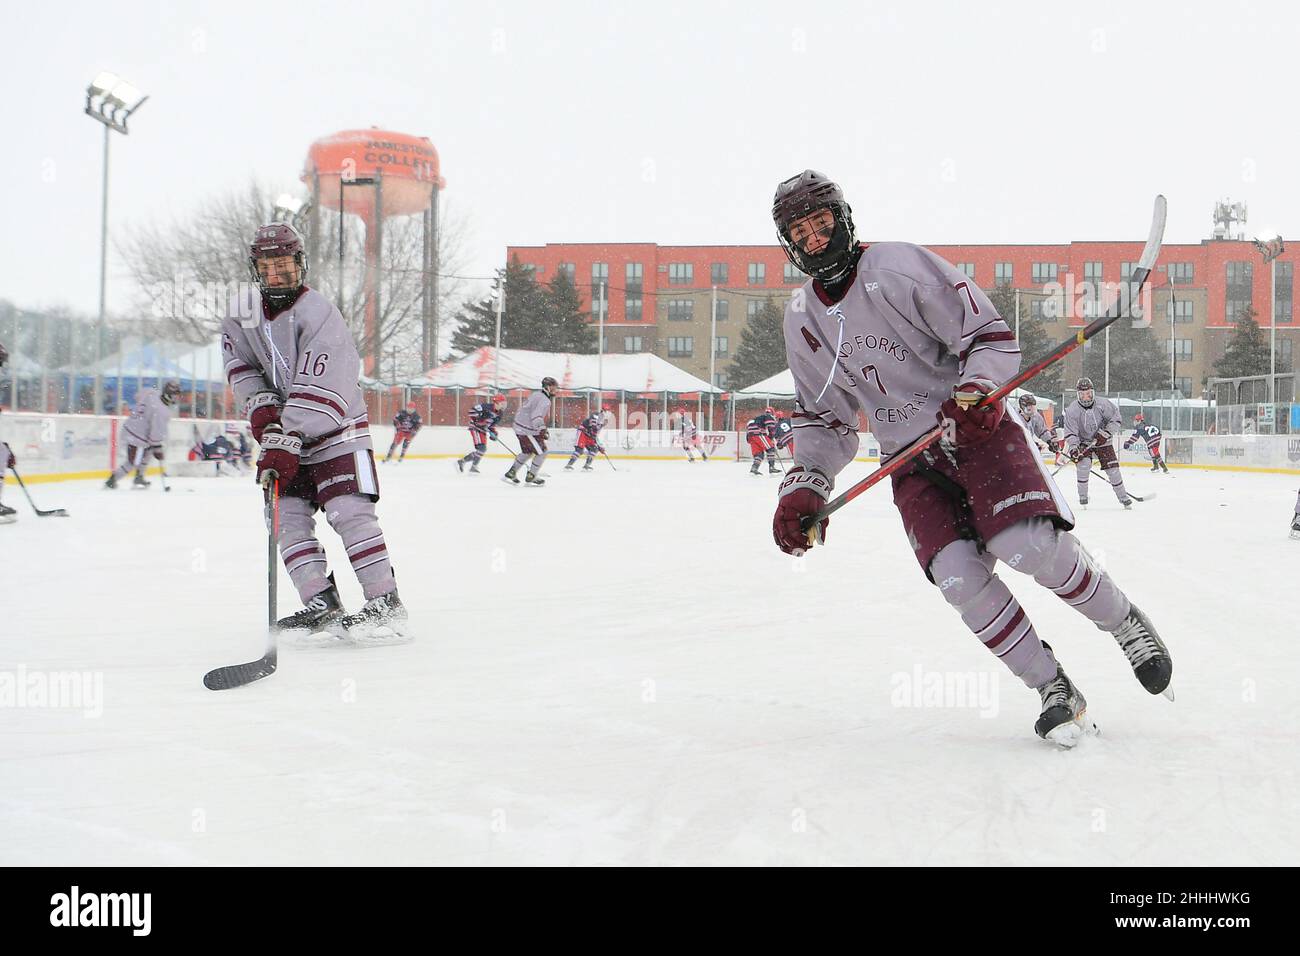 Grand Forks Central Knight skater Connor Litzinger (7) warms up before their game against the Bismarck Century Patriots during the 3rd annual Hockey Day North Dakota outdoor hockey event in Jamestown, ND. Youth, high school and college hockey teams from around North Dakota competed over two days. By Russell Hons/CSM Stock Photo